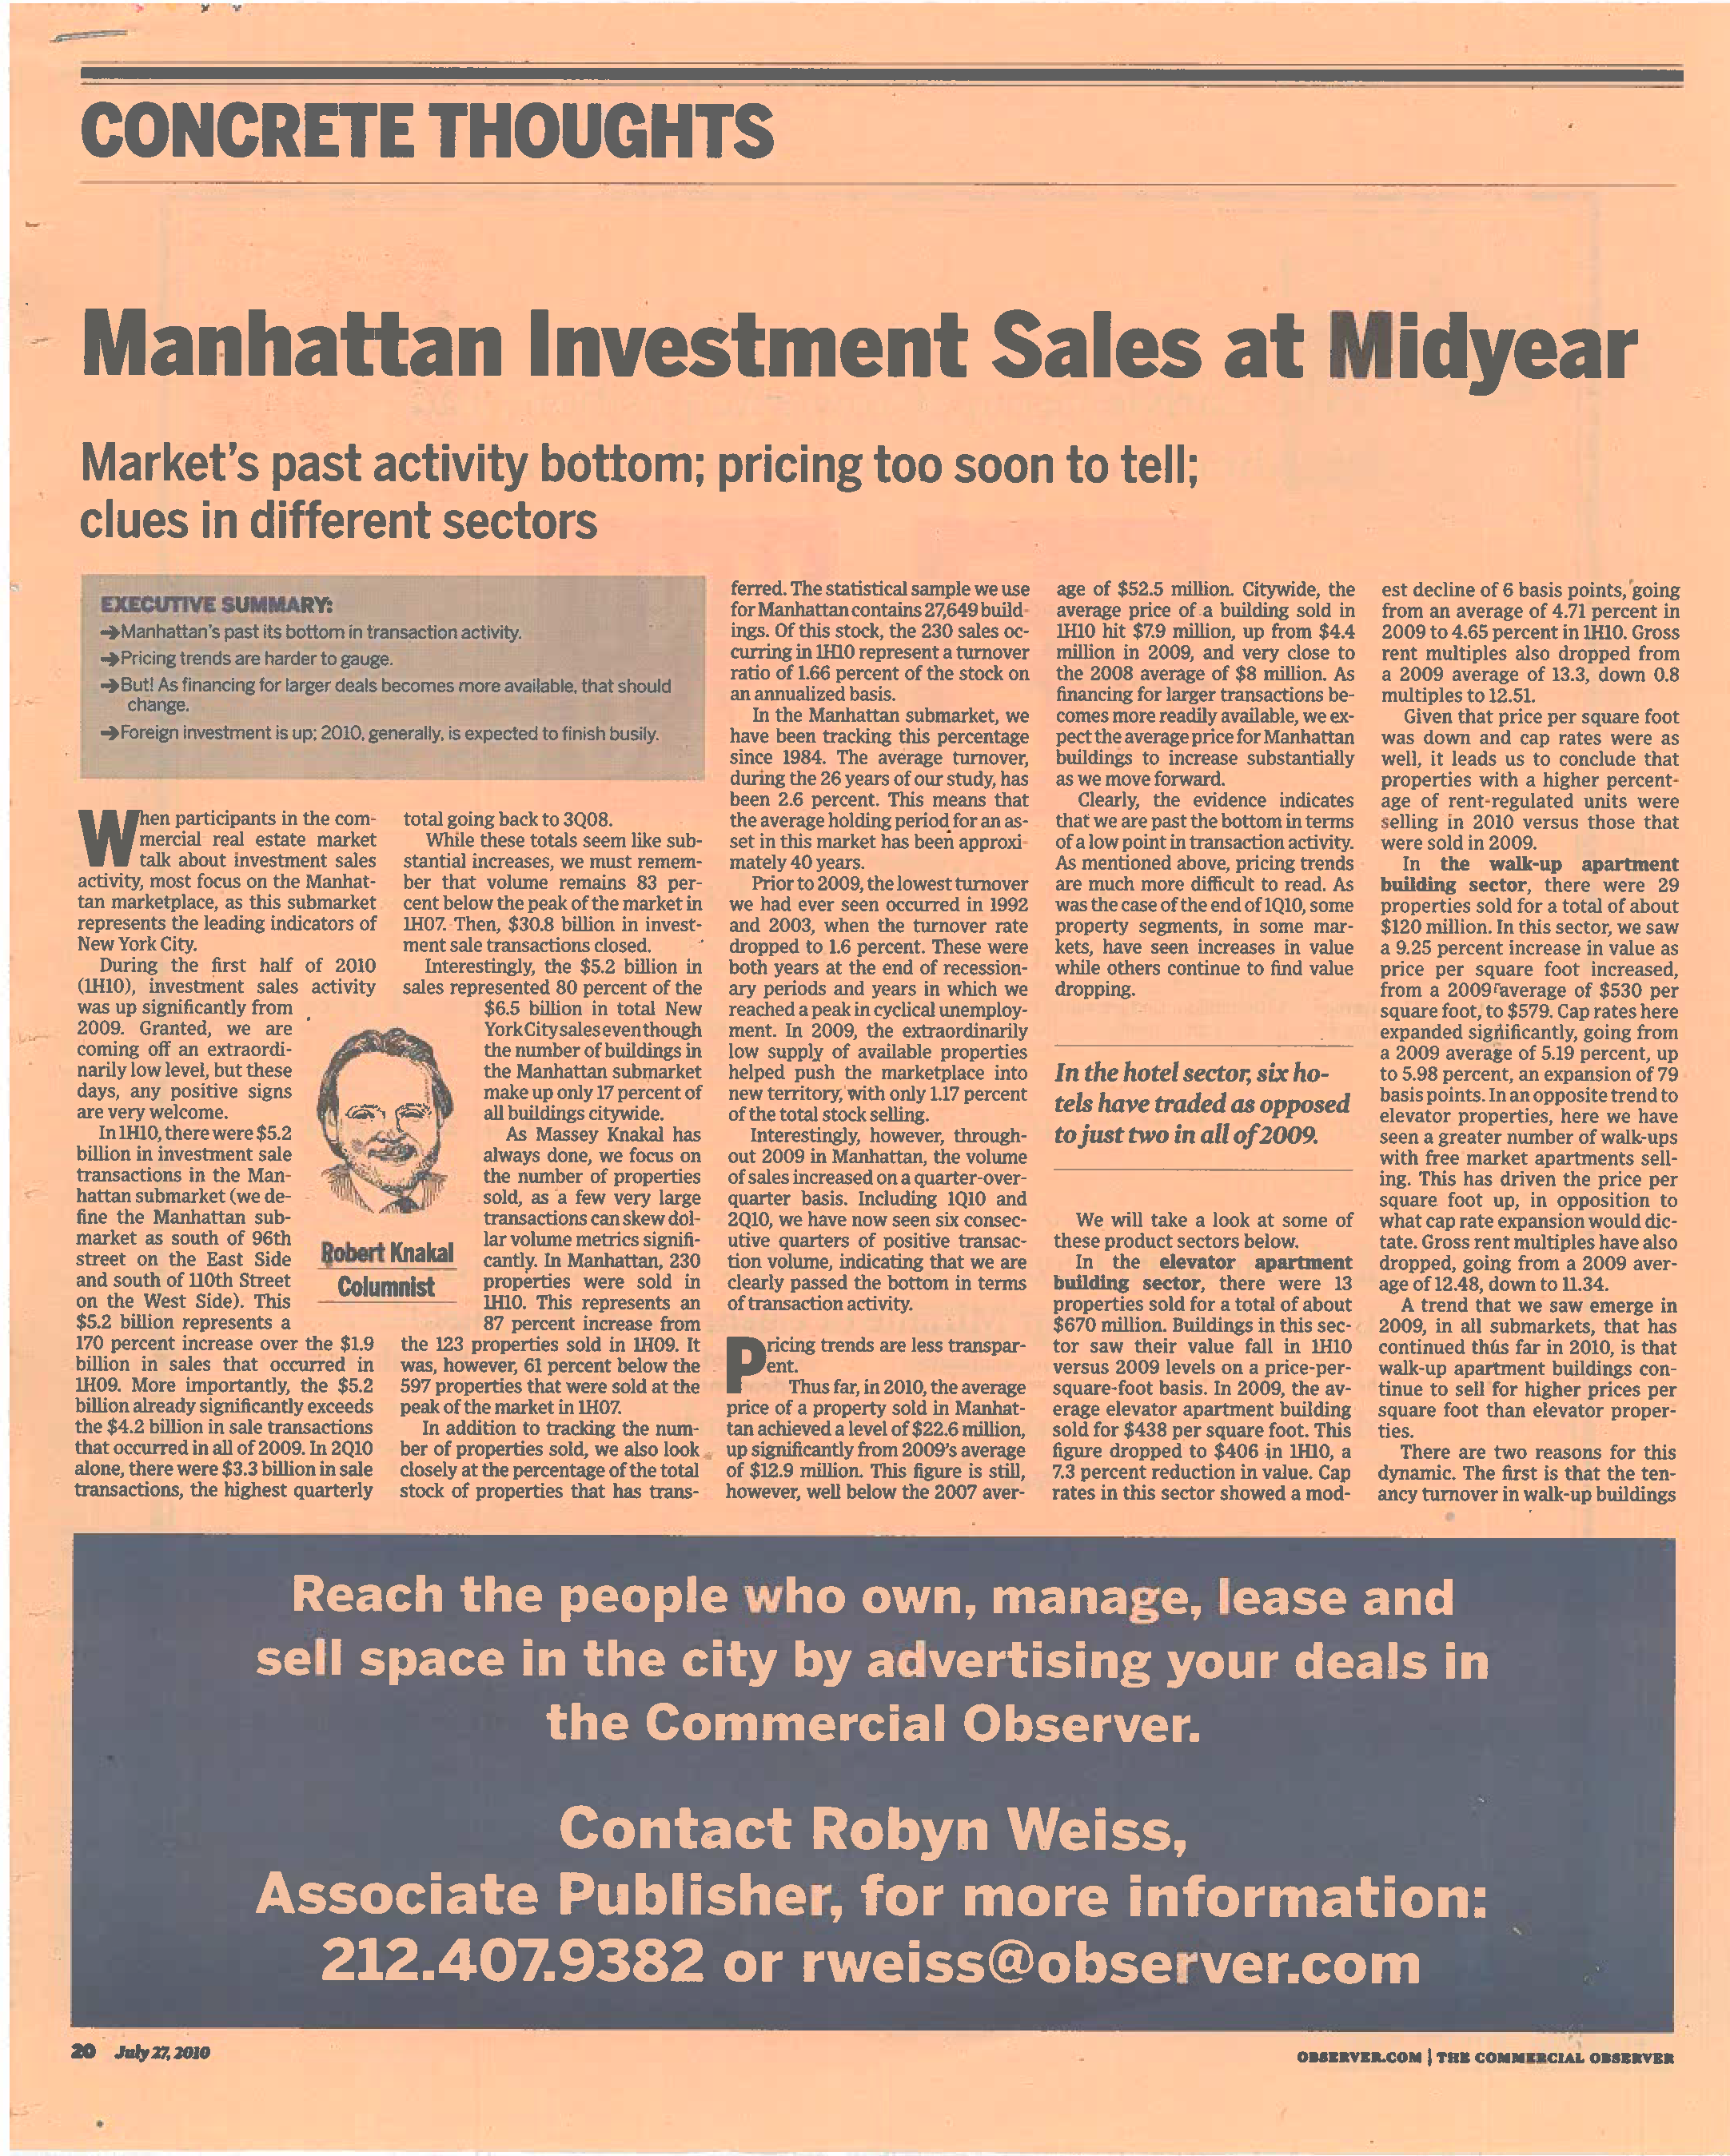 Concrete Thoughts - Manhattan Investment Sales at Midyear - July 27 2010_Page_1